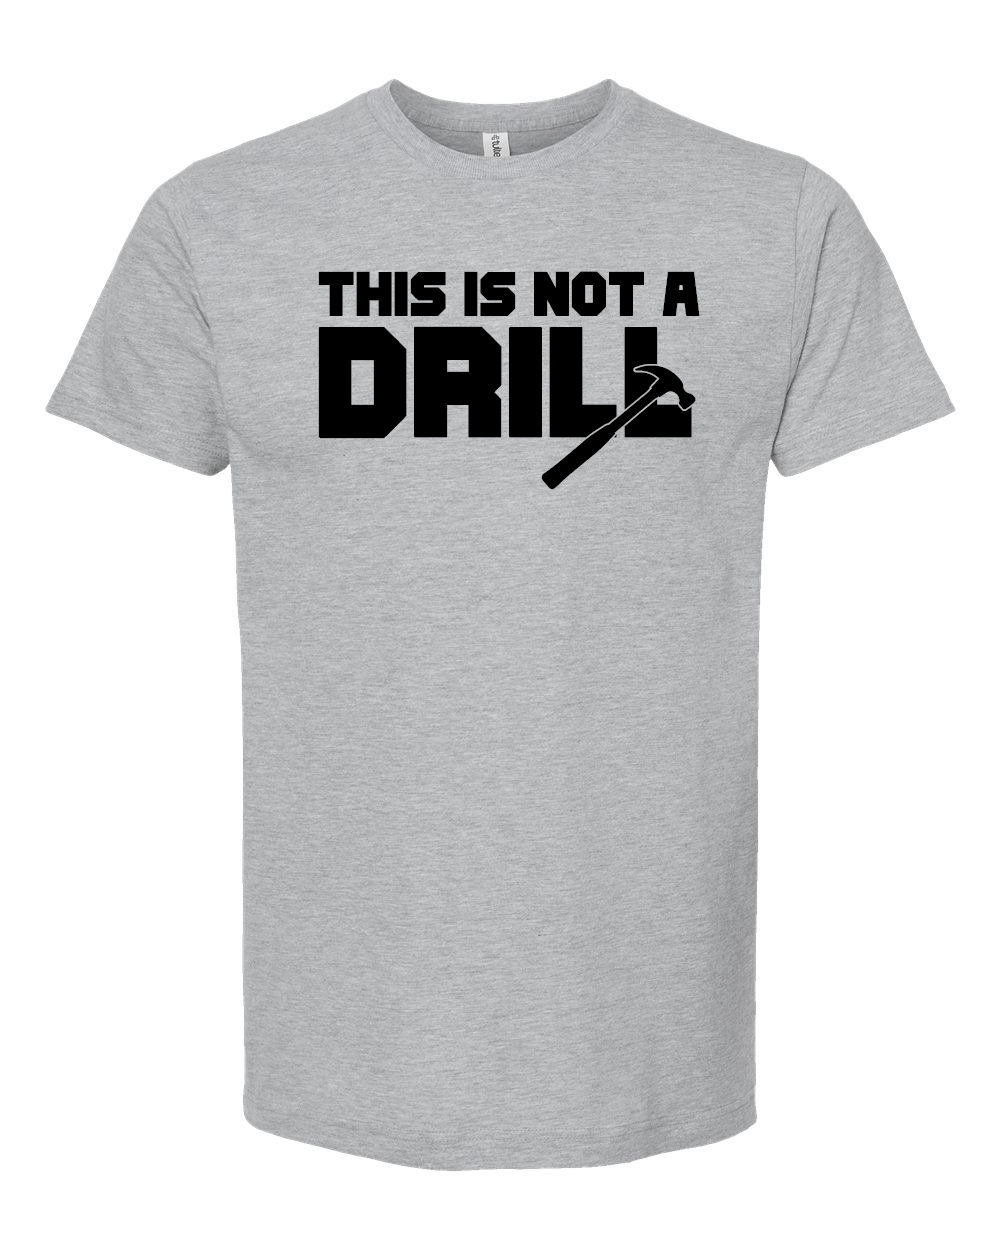 Not a Drill Tee